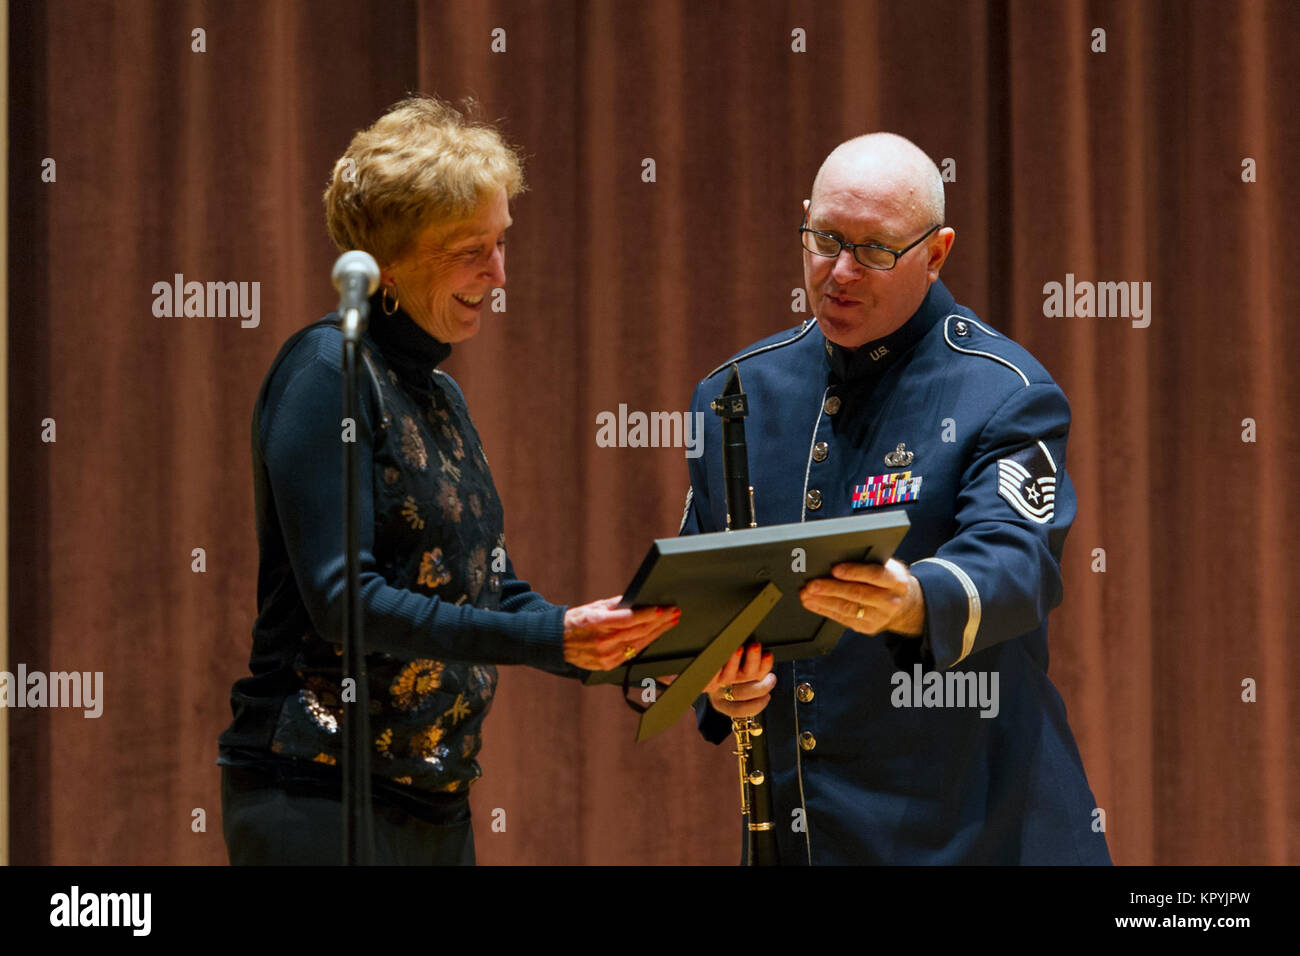 Master Sgt. Mark Craig, Air Force Band of the West NCO in charge, presents a gift to Dr. Suzanne Shipley, Midwestern State University president, to thank her for hosting the concert at the school's Akin Auditorium Dec. 13, 2017. The band travels 125,000 miles annually while on tour. (U.S. Air Force Stock Photo